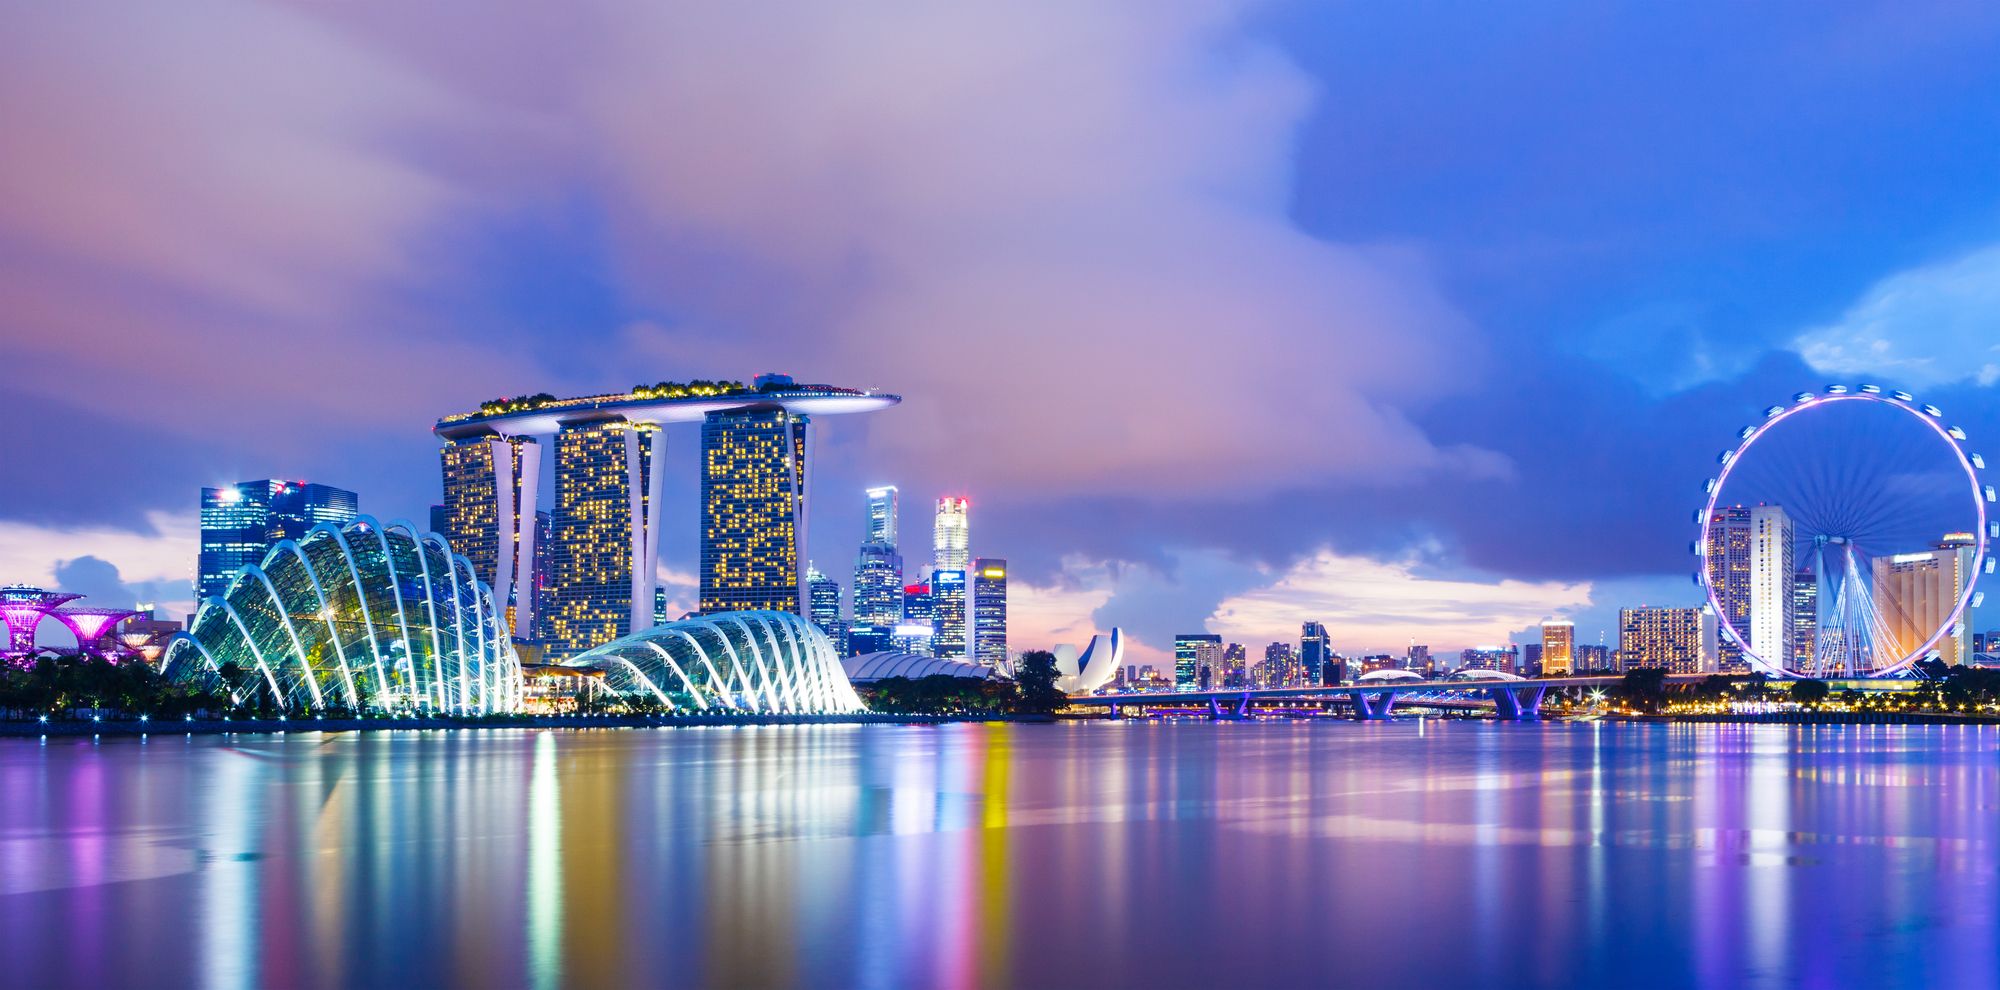 What-are-the-factors-that-make-the-economy-in-Singapore-tick?